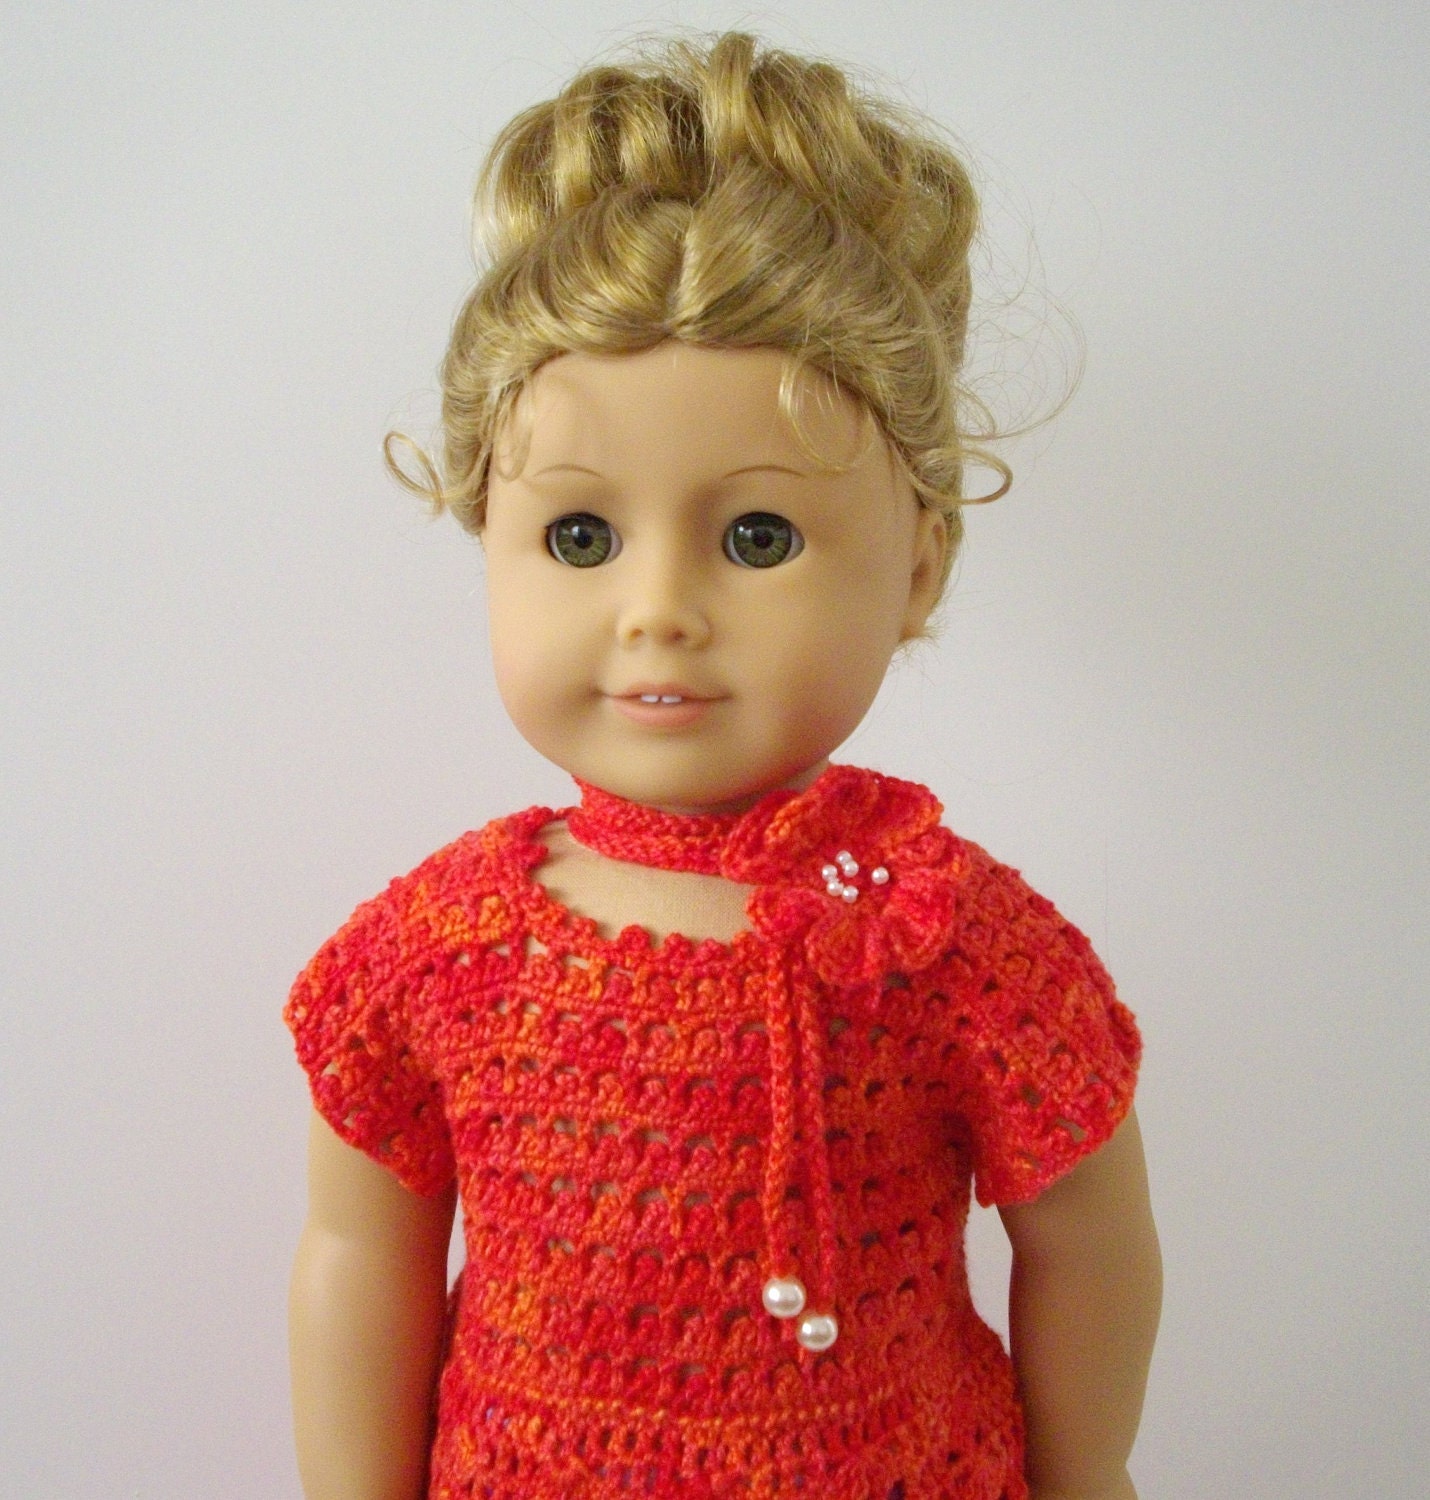 Crochet Patterns: Barbie Doll Clothing - Yahoo! Voices - voices